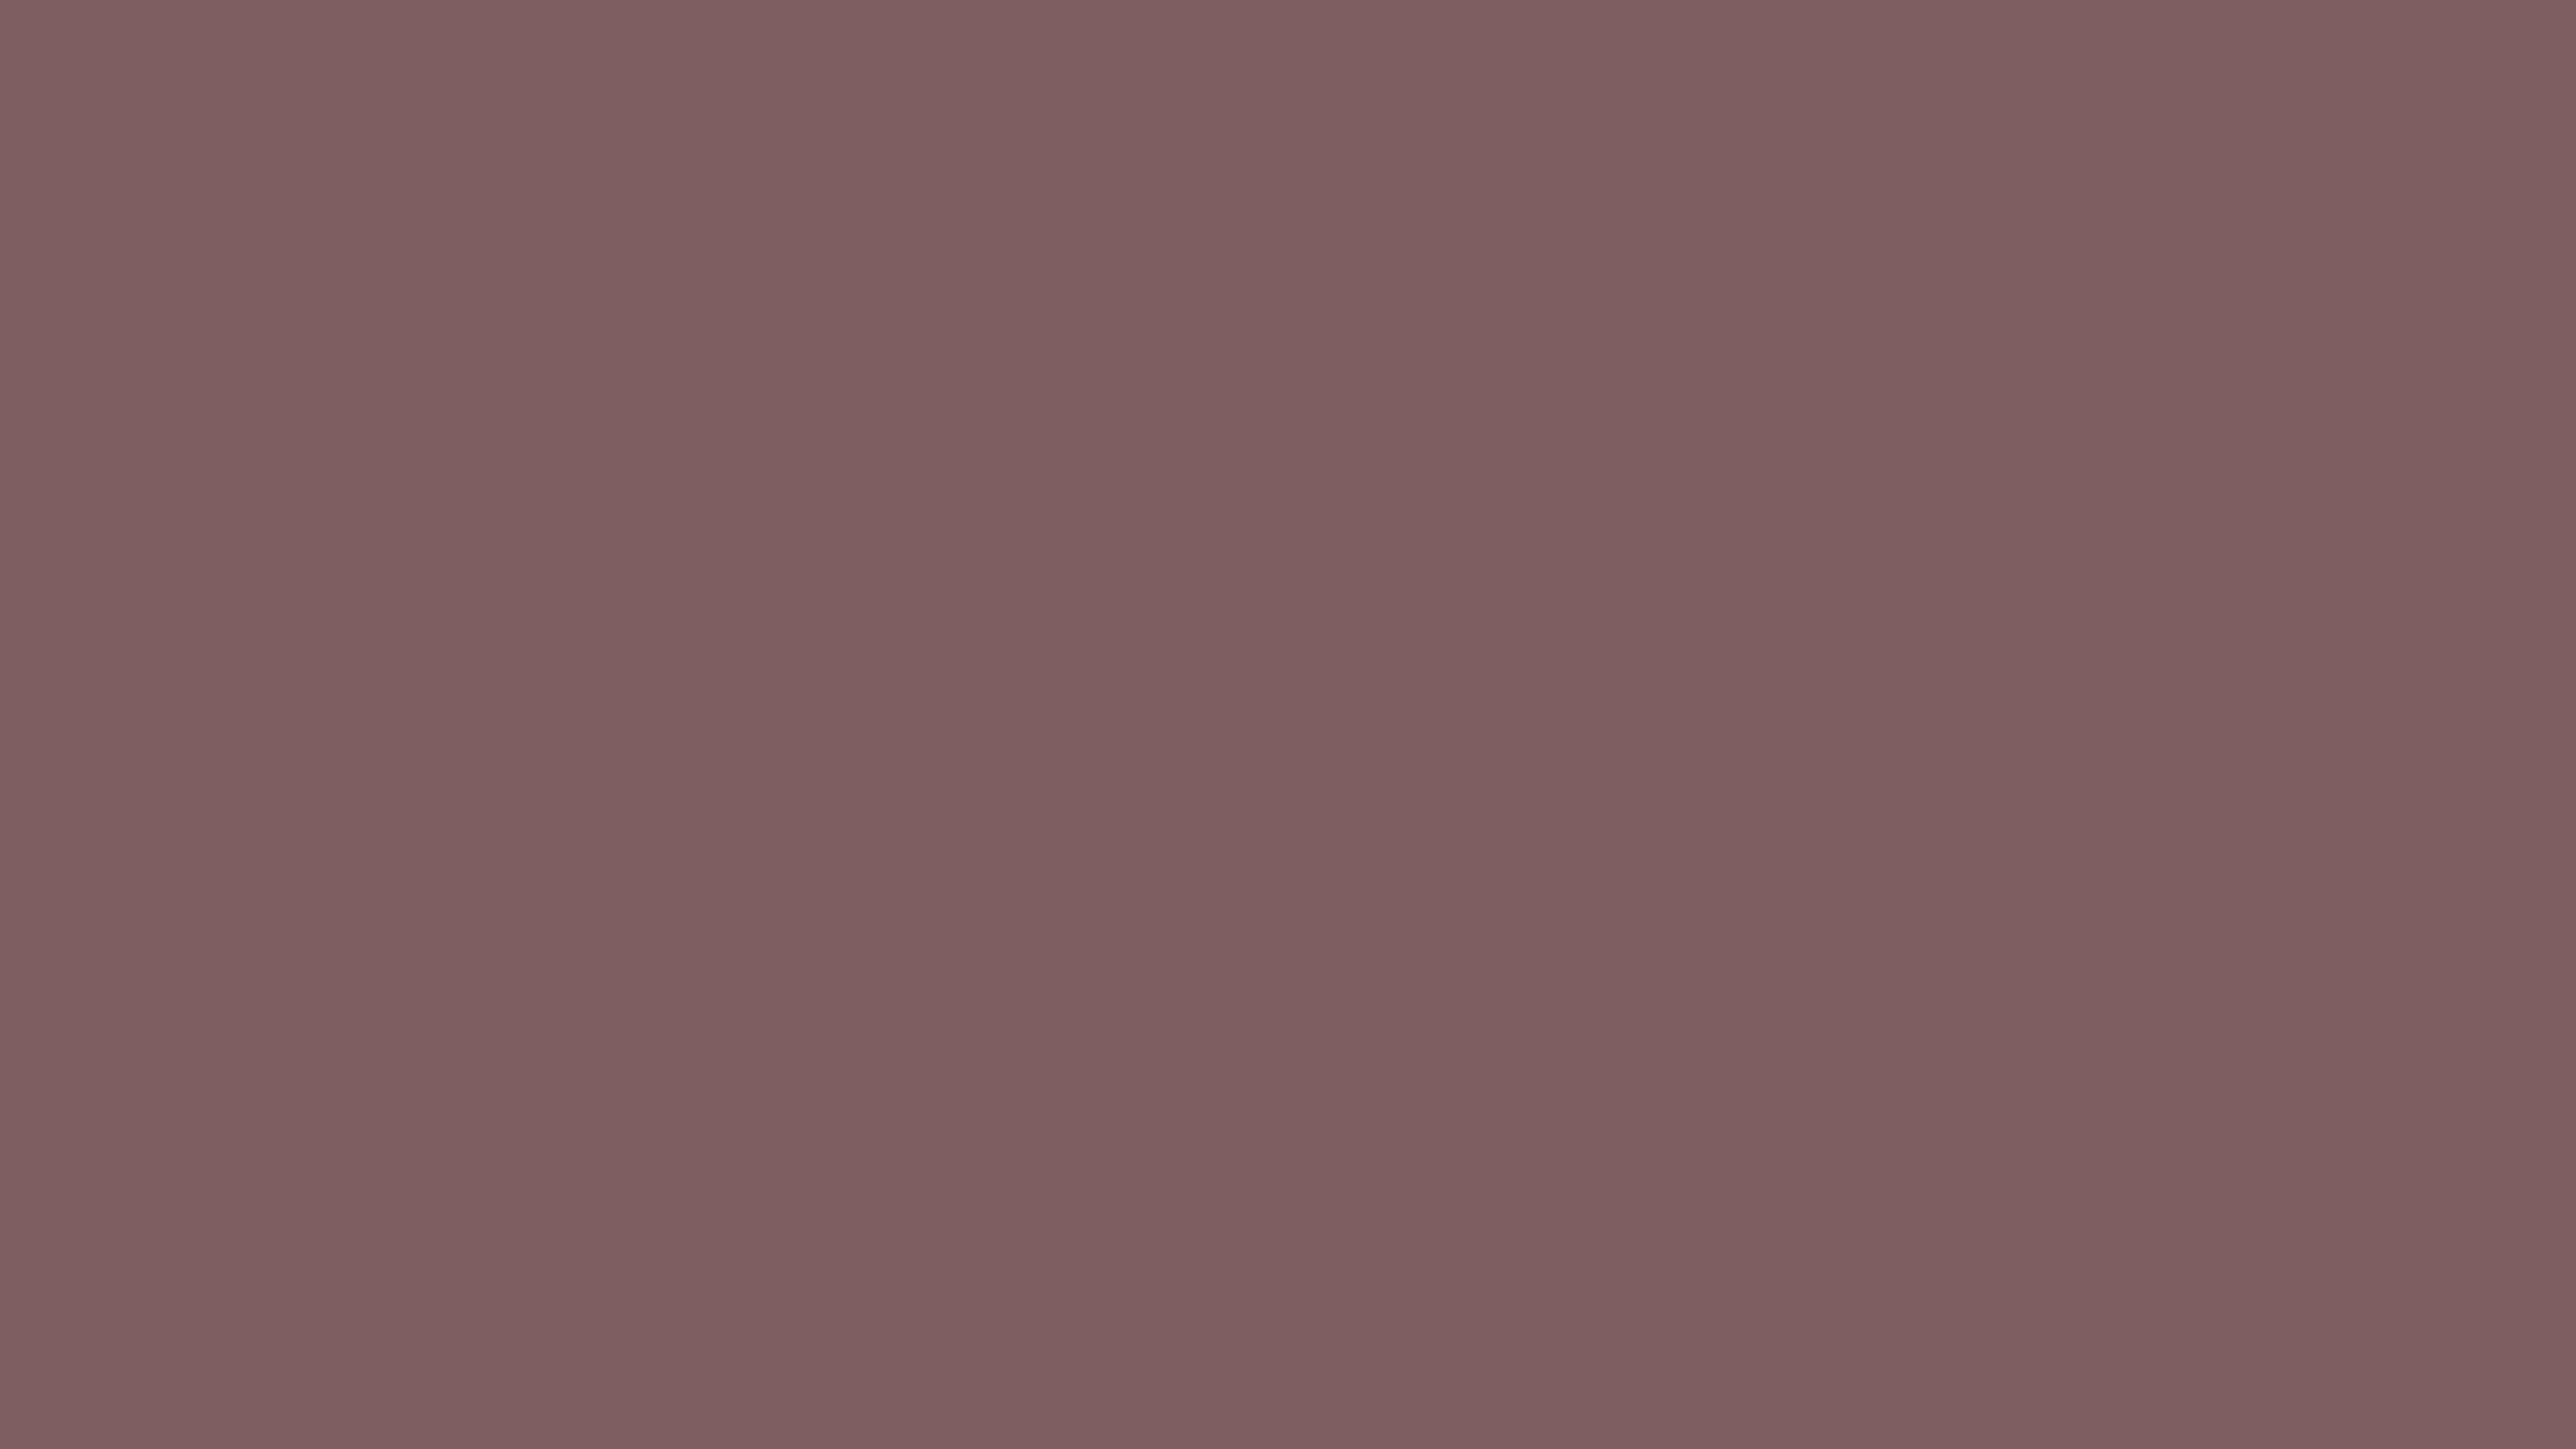 4096x2304 Deep Taupe Solid Color Background